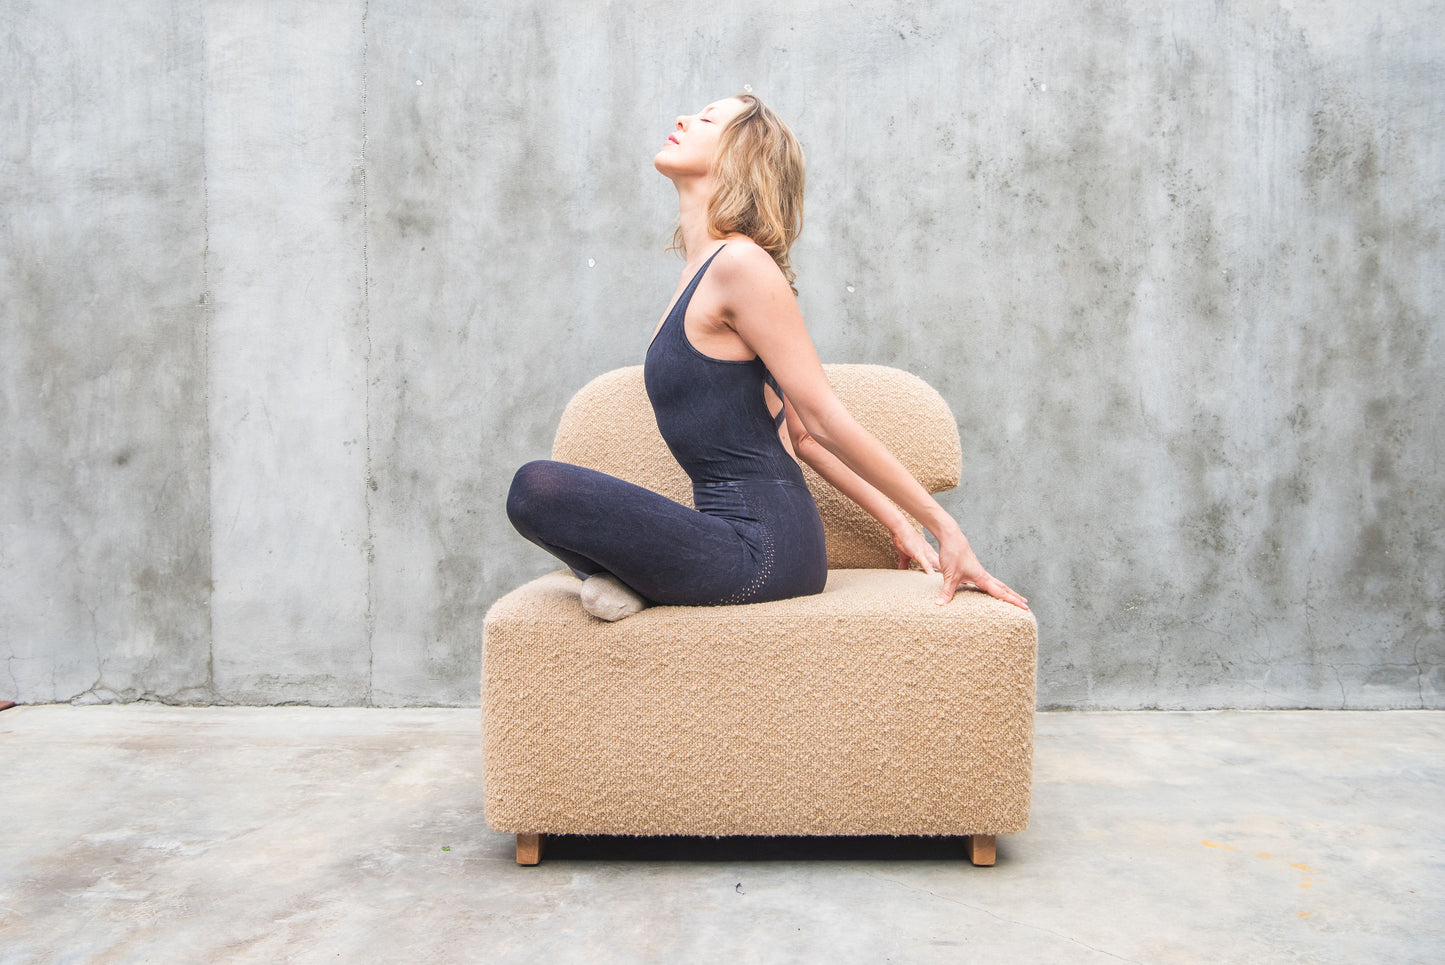 Women posing on Dune-colored bouclé Meditation Chair by Rue and Williams Home. Modern design with no arms and a curved back, perfect for enhancing mindfulness practices and adding tranquility to any space.